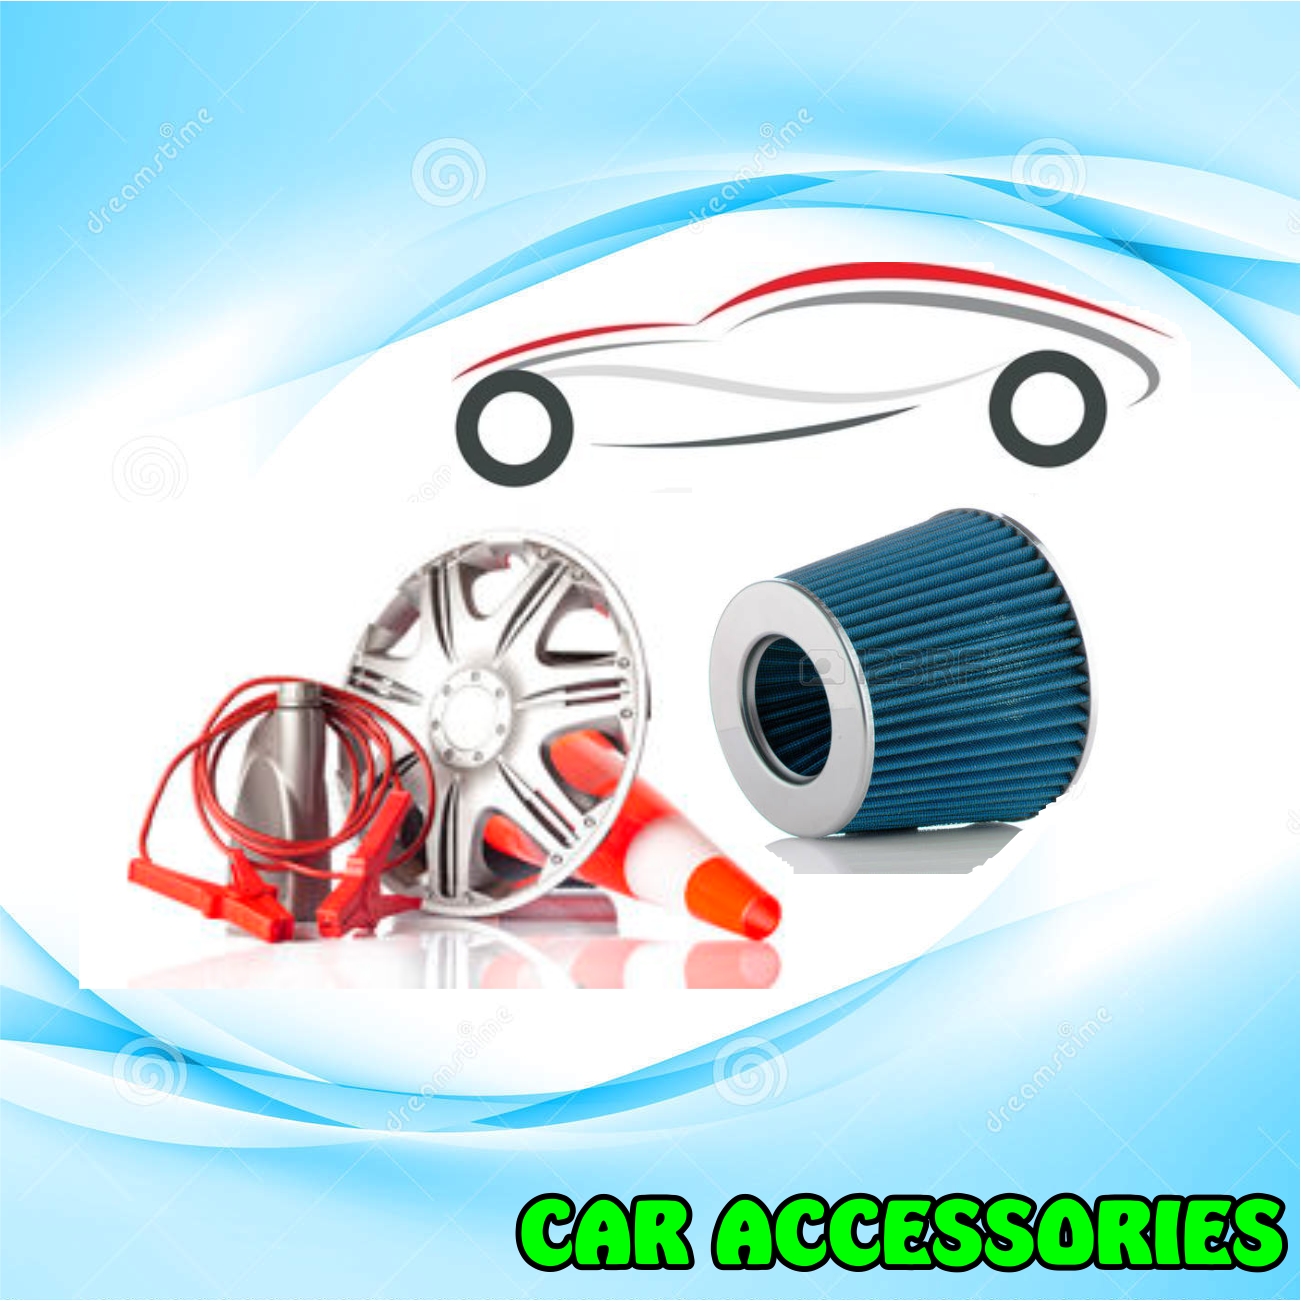 CLICK ME  CAR ACCESSORIES GRAVITY AUDIO PHOENIX DURBAN CONE FILTERS SEAT COVERS TAIL PIECE DOOR PIN GEAR KNOBS GRAVITY 0315072463 GRAVITY CAR ACCESSORIE STORE IN DURBAN 0315072736